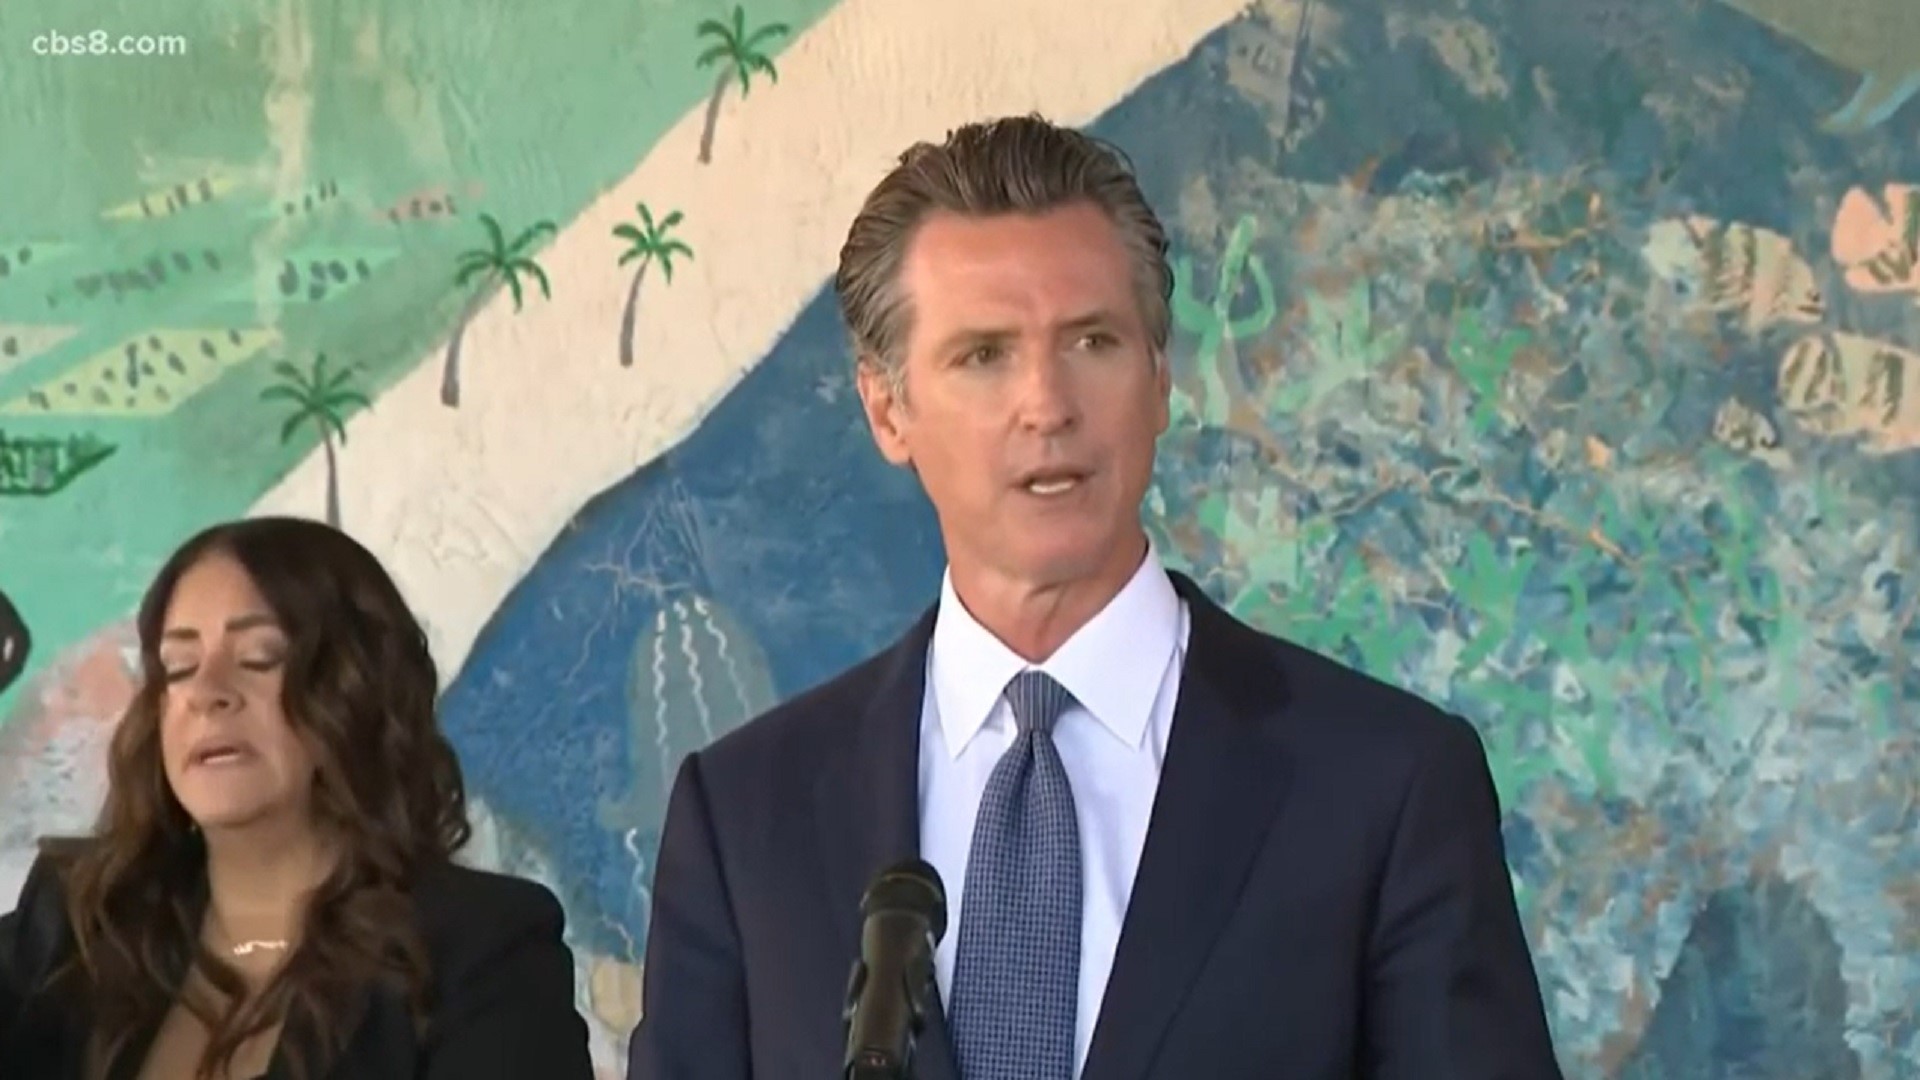 On Friday, Governor Gavin Newsom kicked off a four-day campaign encouraging voters to reject the recall effort. Newsom will be in San Diego on Saturday.